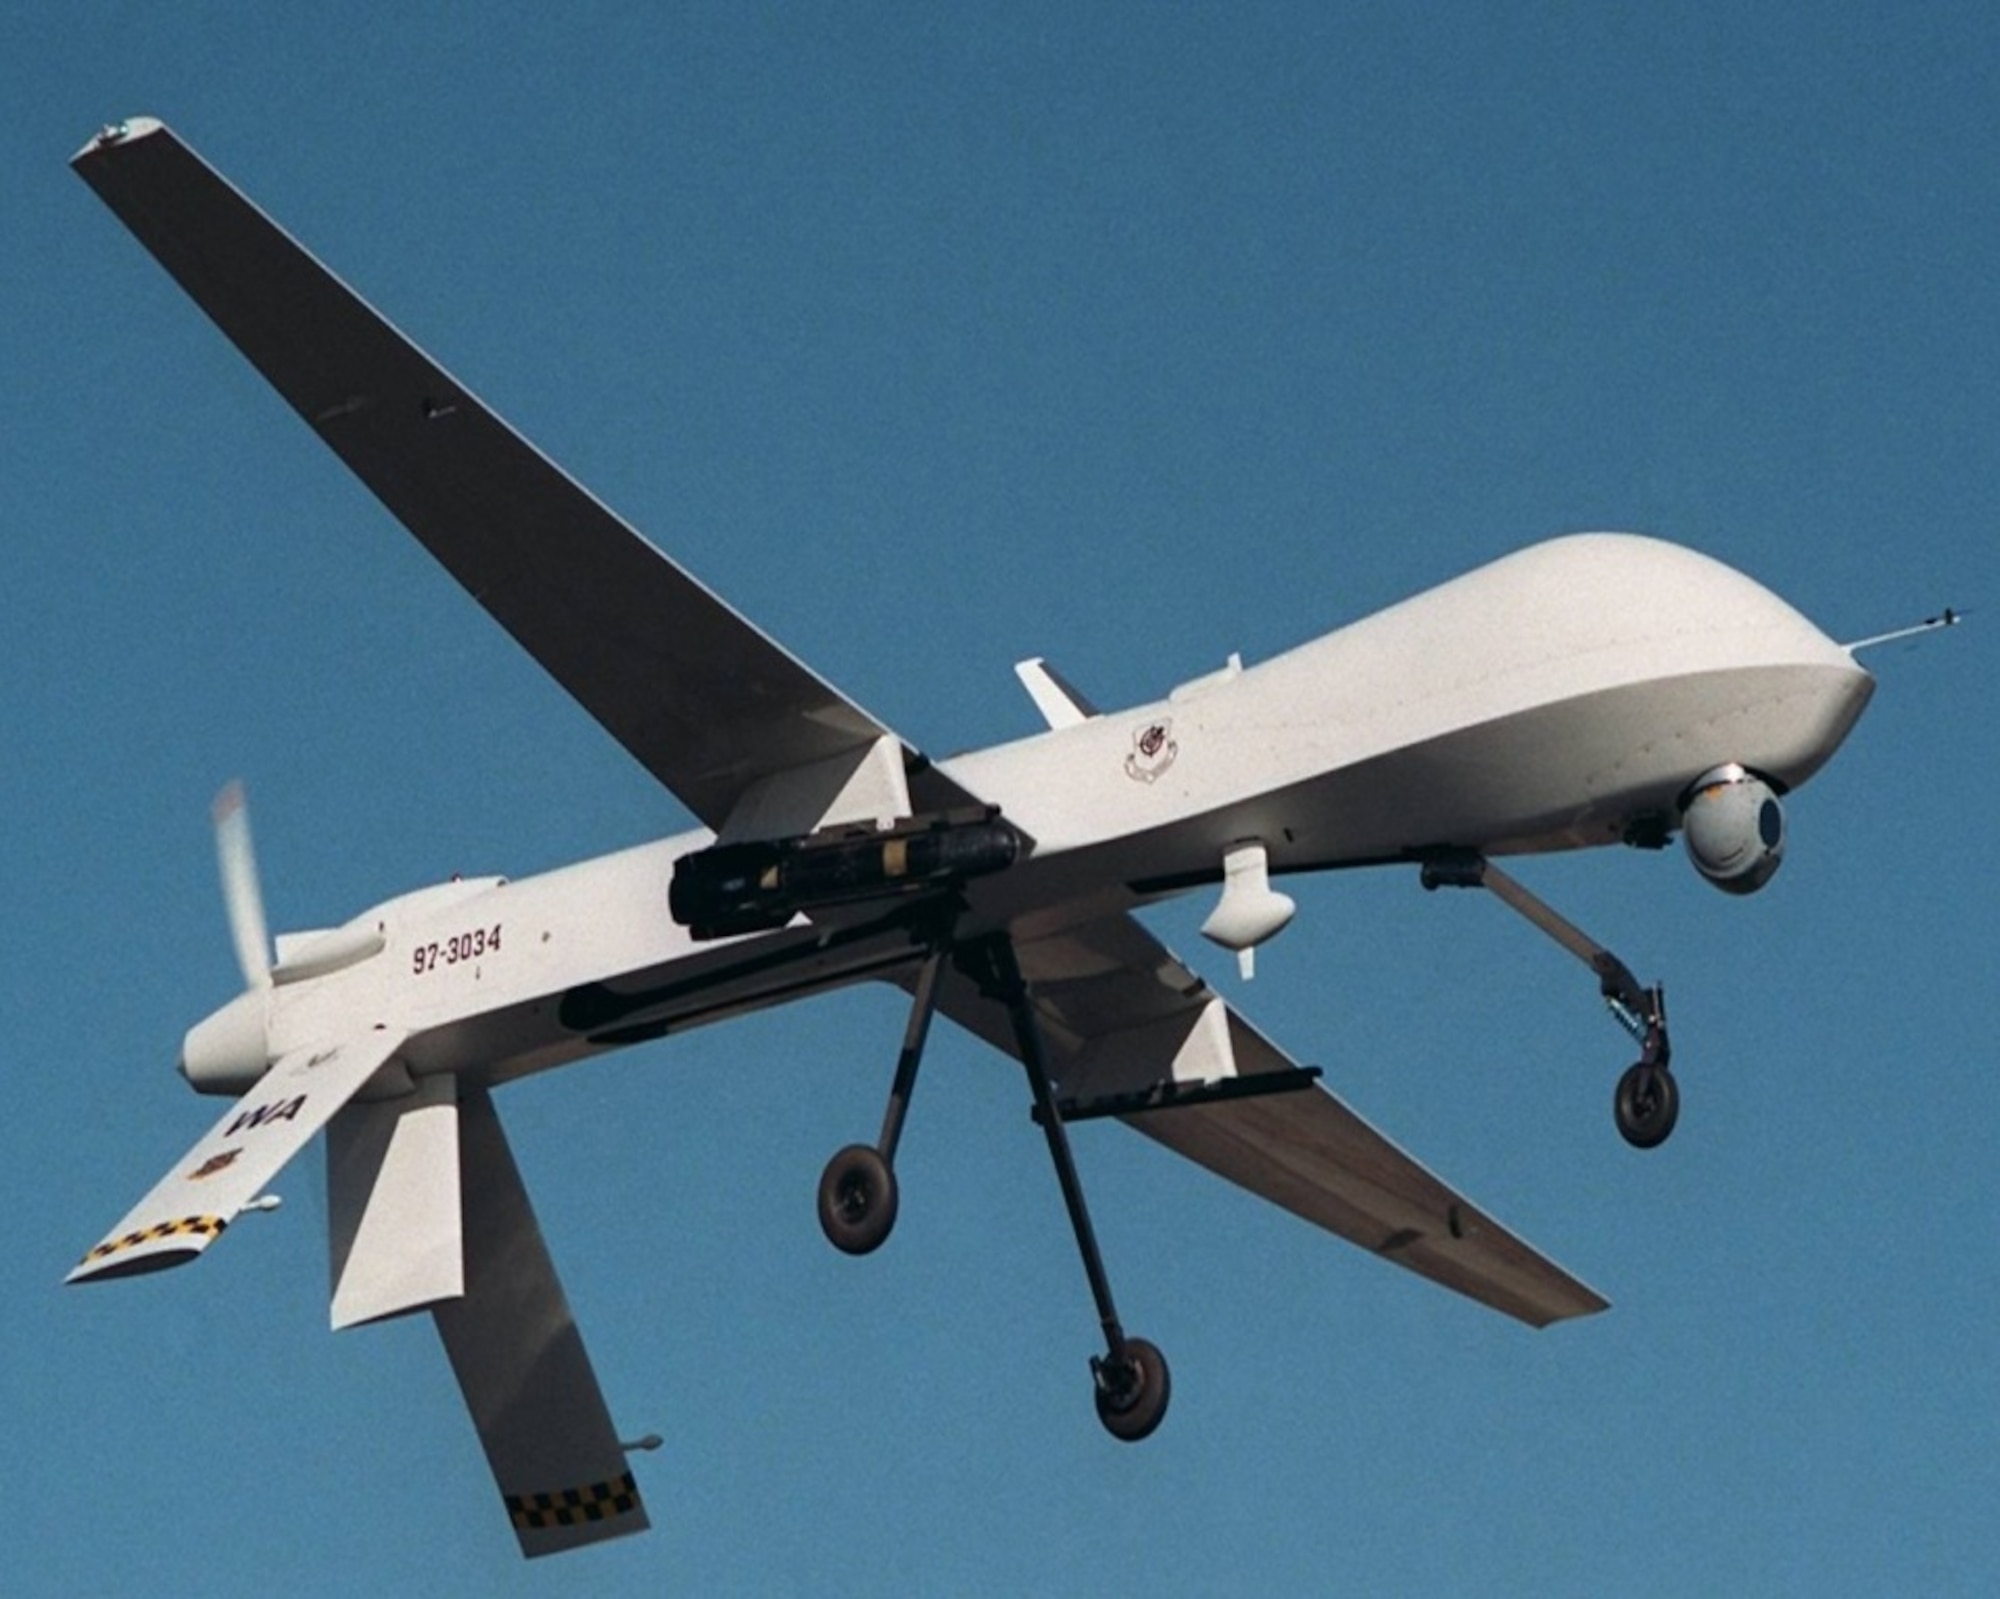 An MQ-1 Predator armed with an AGM-114 Hellfire missile flies a training mission. The MQ-1’s primary mission is interdiction and conducting reconnaissance against critical, time-sensitive targets.